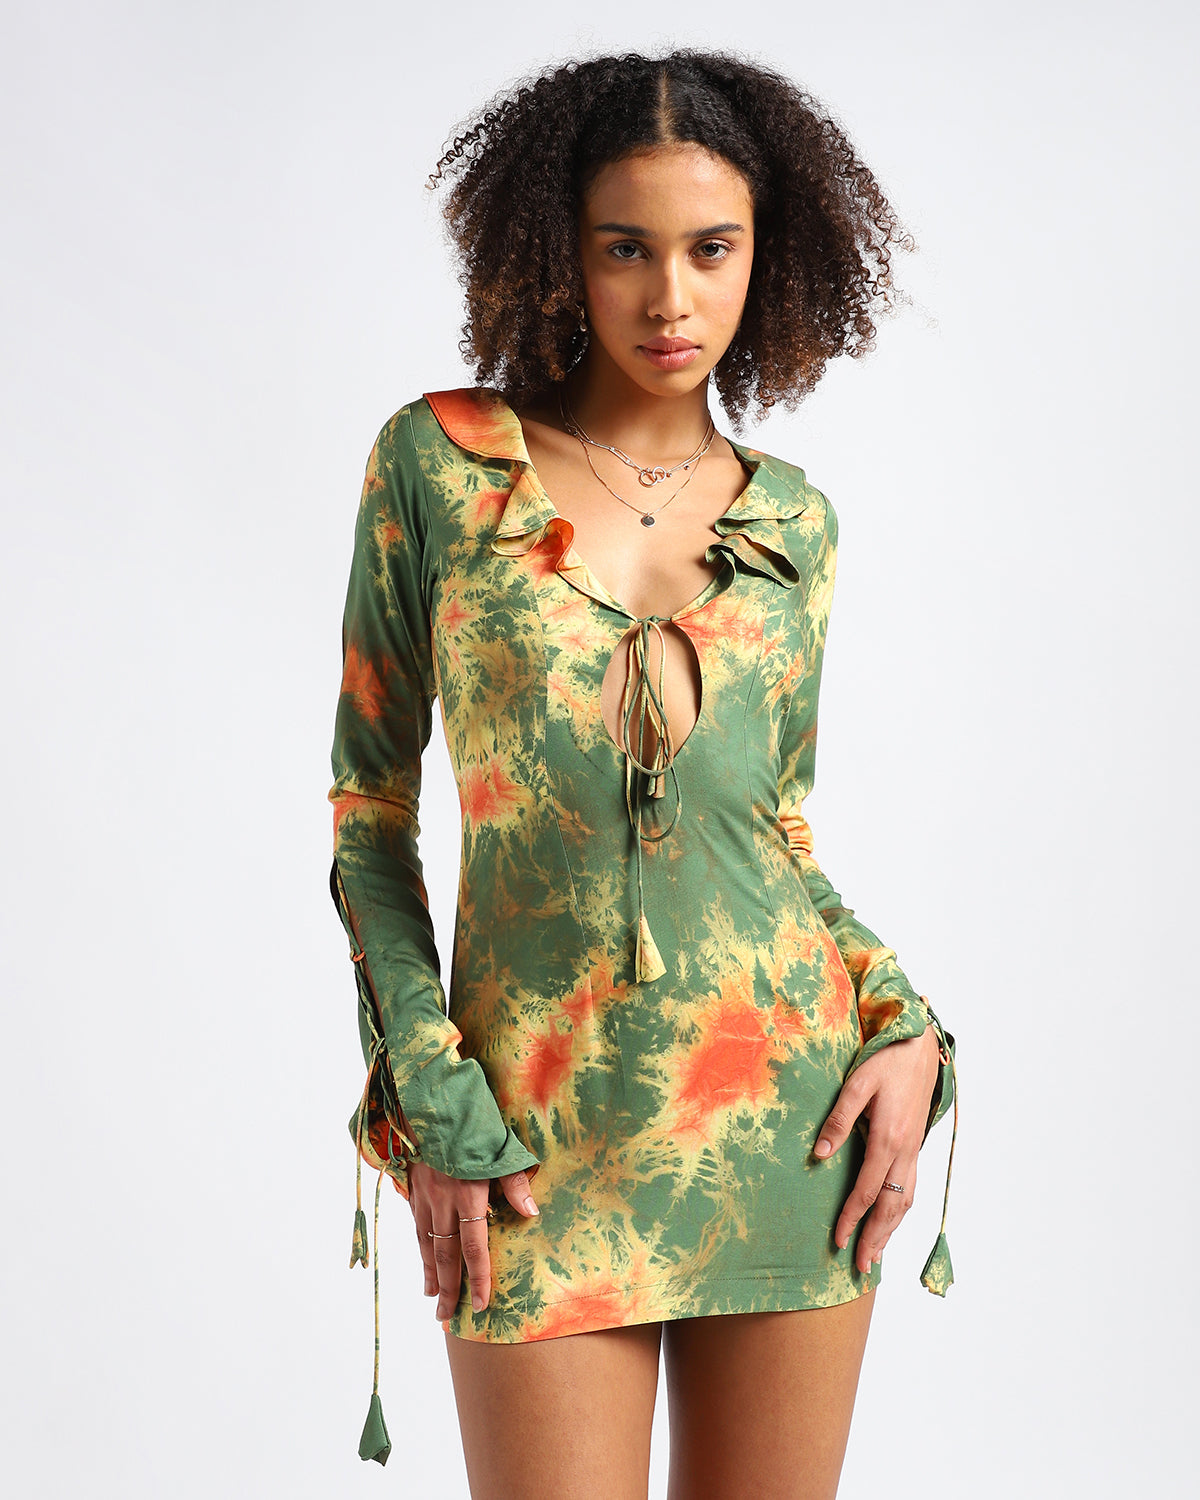 State Of Flow : Conscious Ruffled Key Hole Neck Line With Adjustable Bell Sleeves Mini Dress